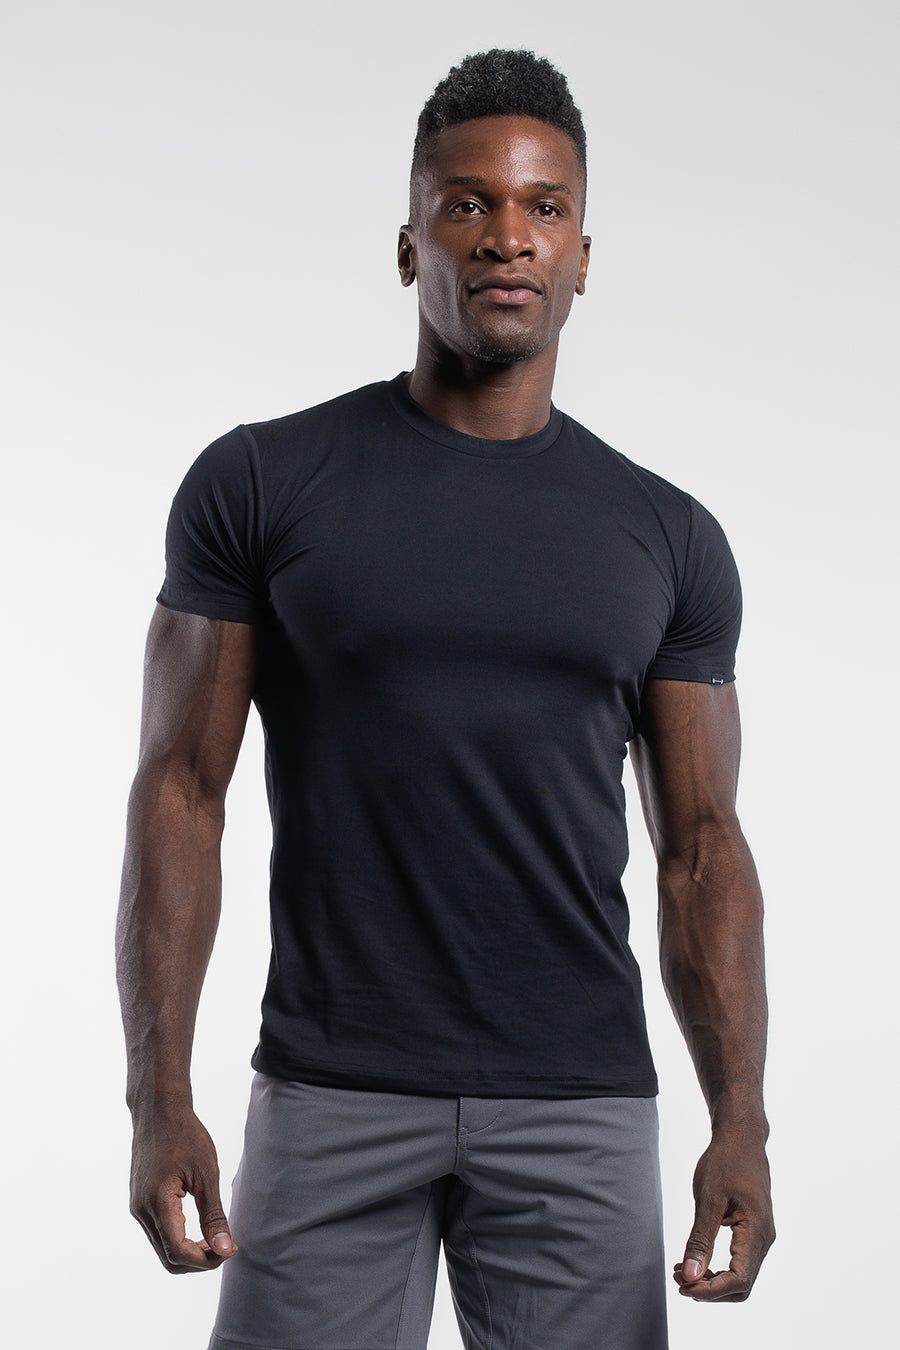 Men's Compression Tops Sports Running Training Gym T-shirts Moisture Wicking 